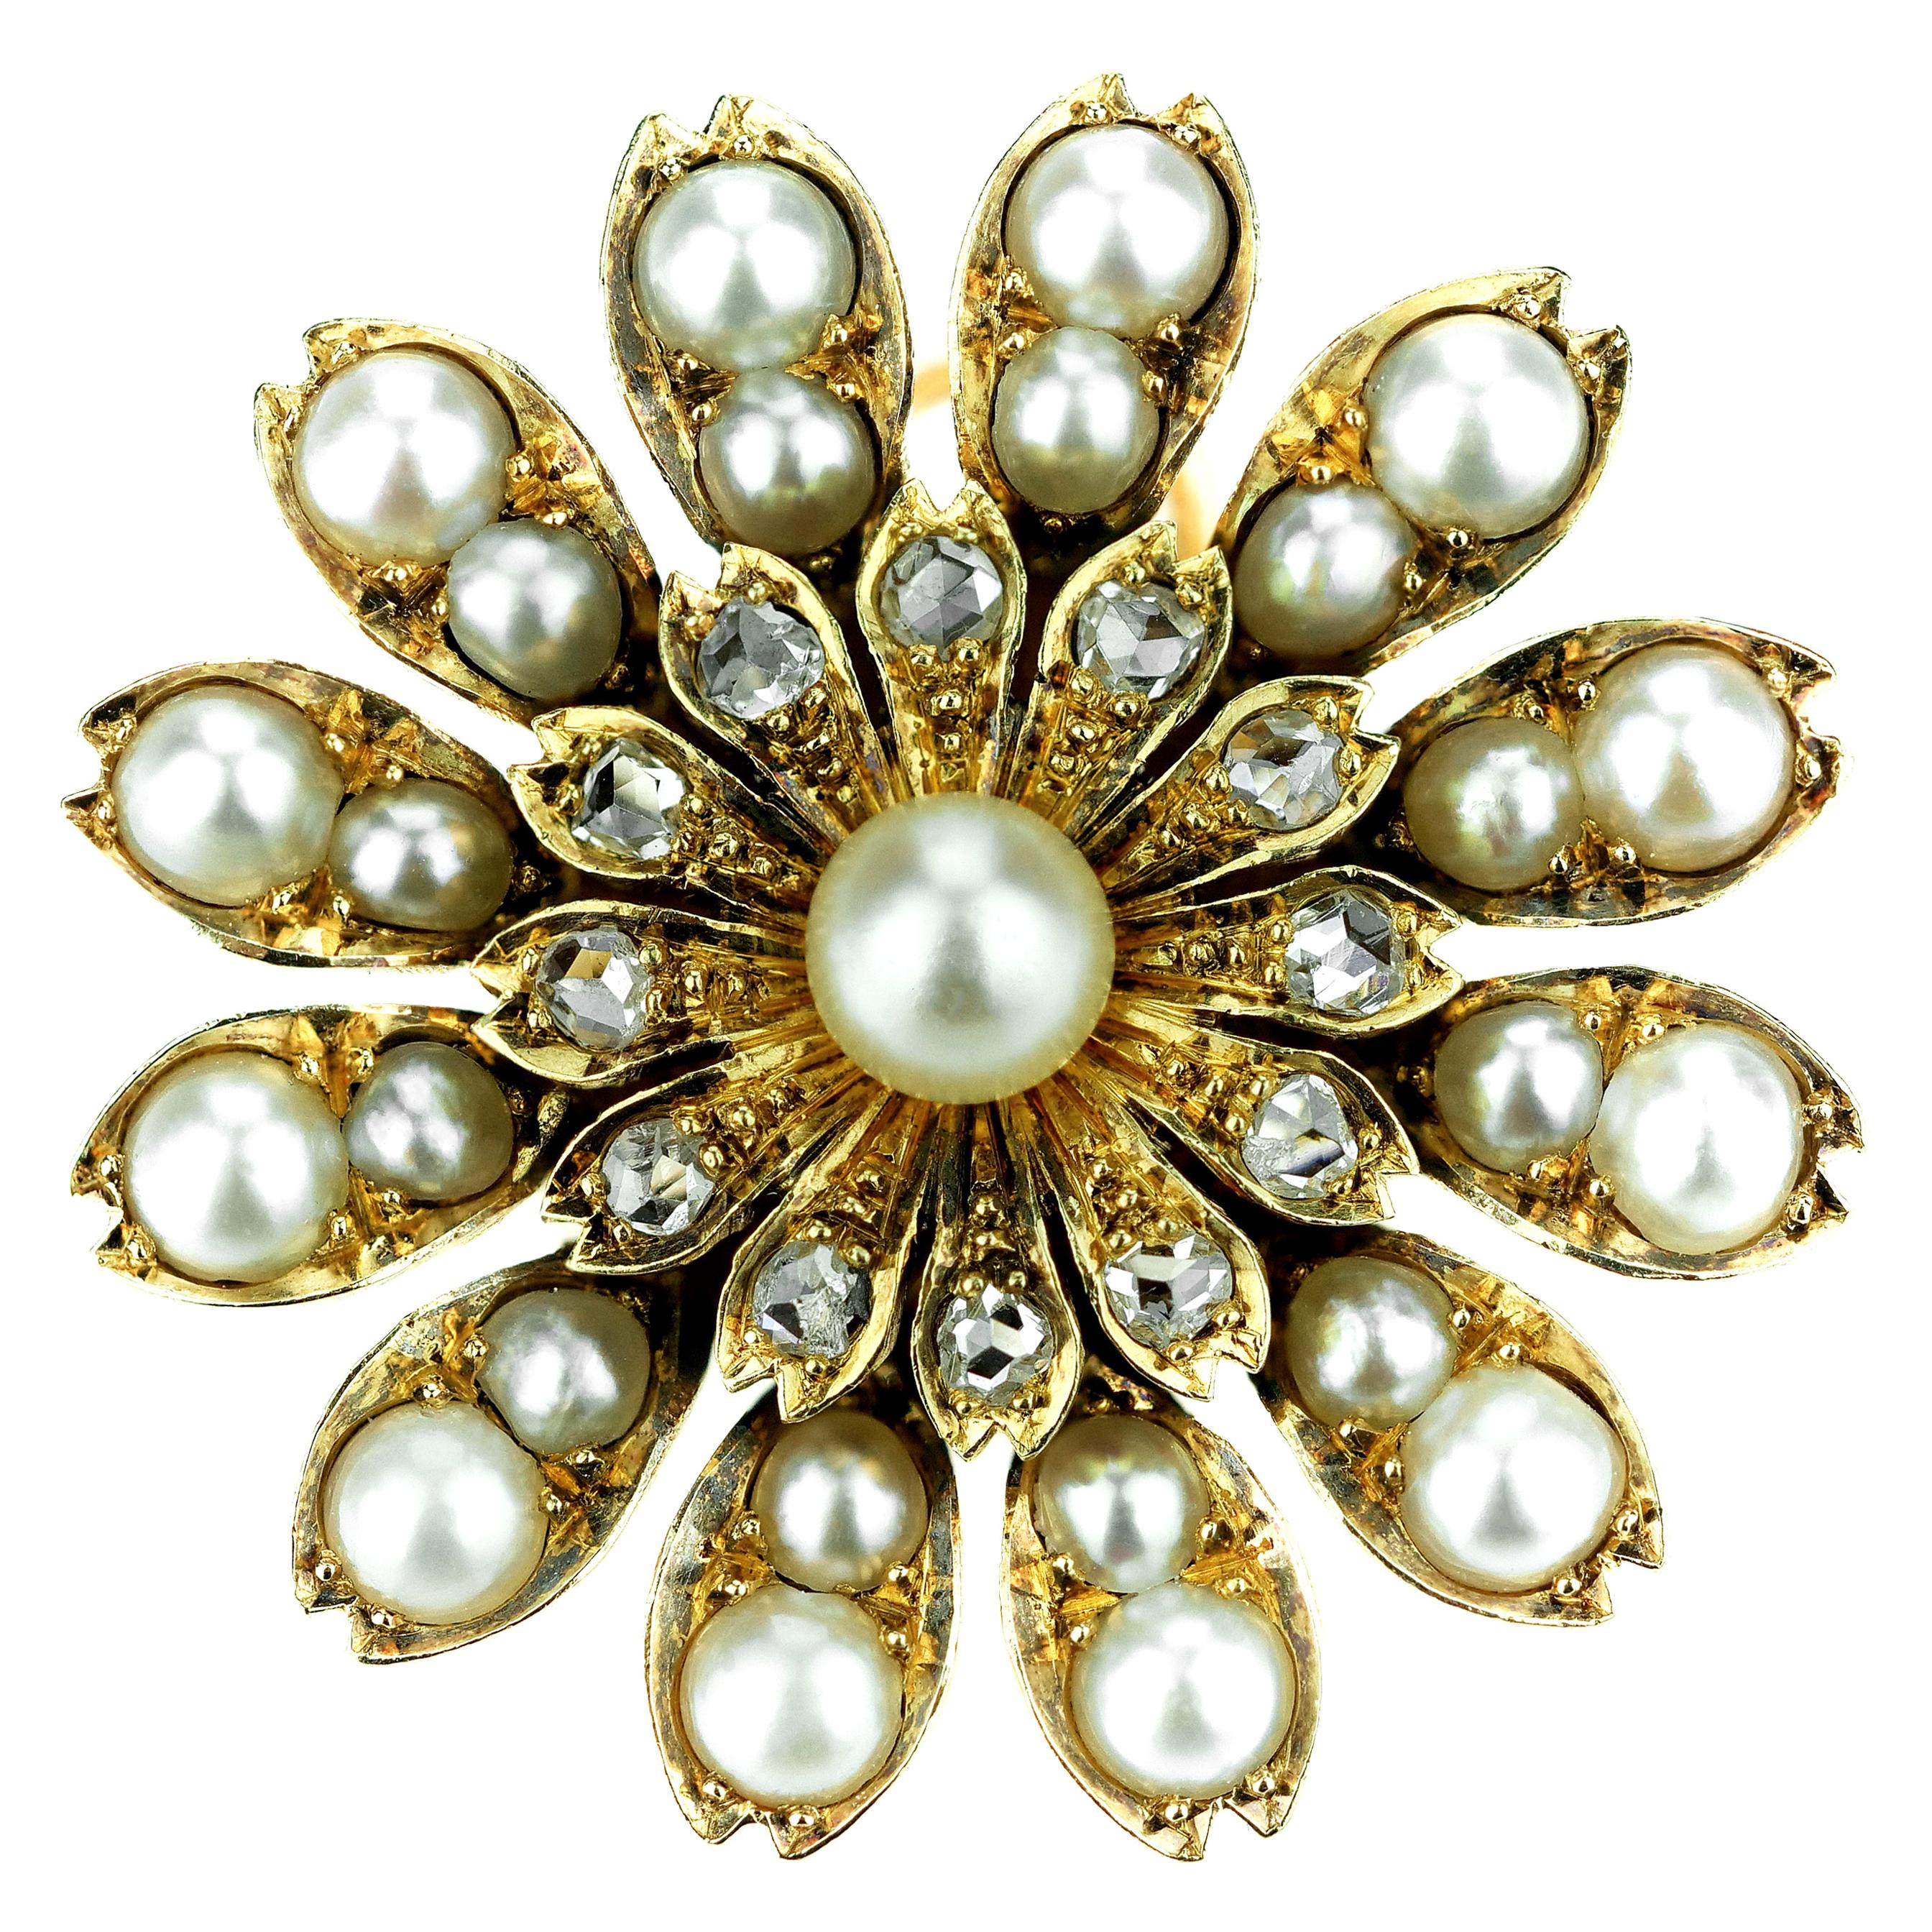 Antique Victorian Flower Brooch/Pendant with Natural Pearl and Rose Cut Diamonds